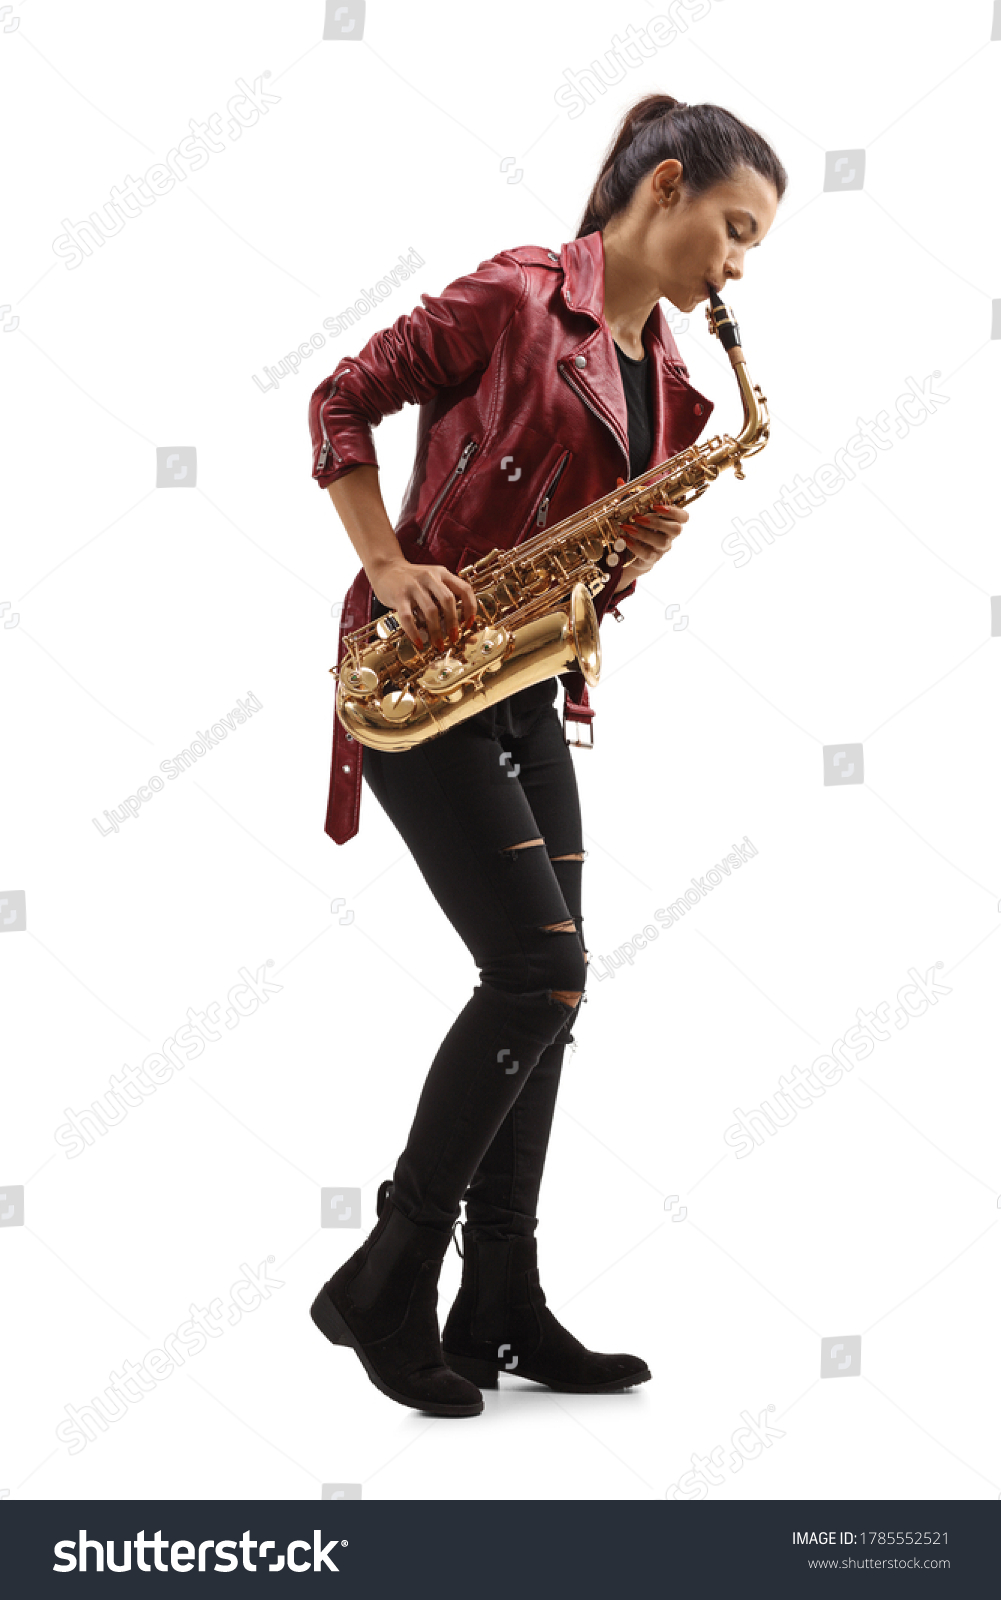 Full length profile shot of a young woman in a leather jacket playing a saxophone isolated on white background #1785552521